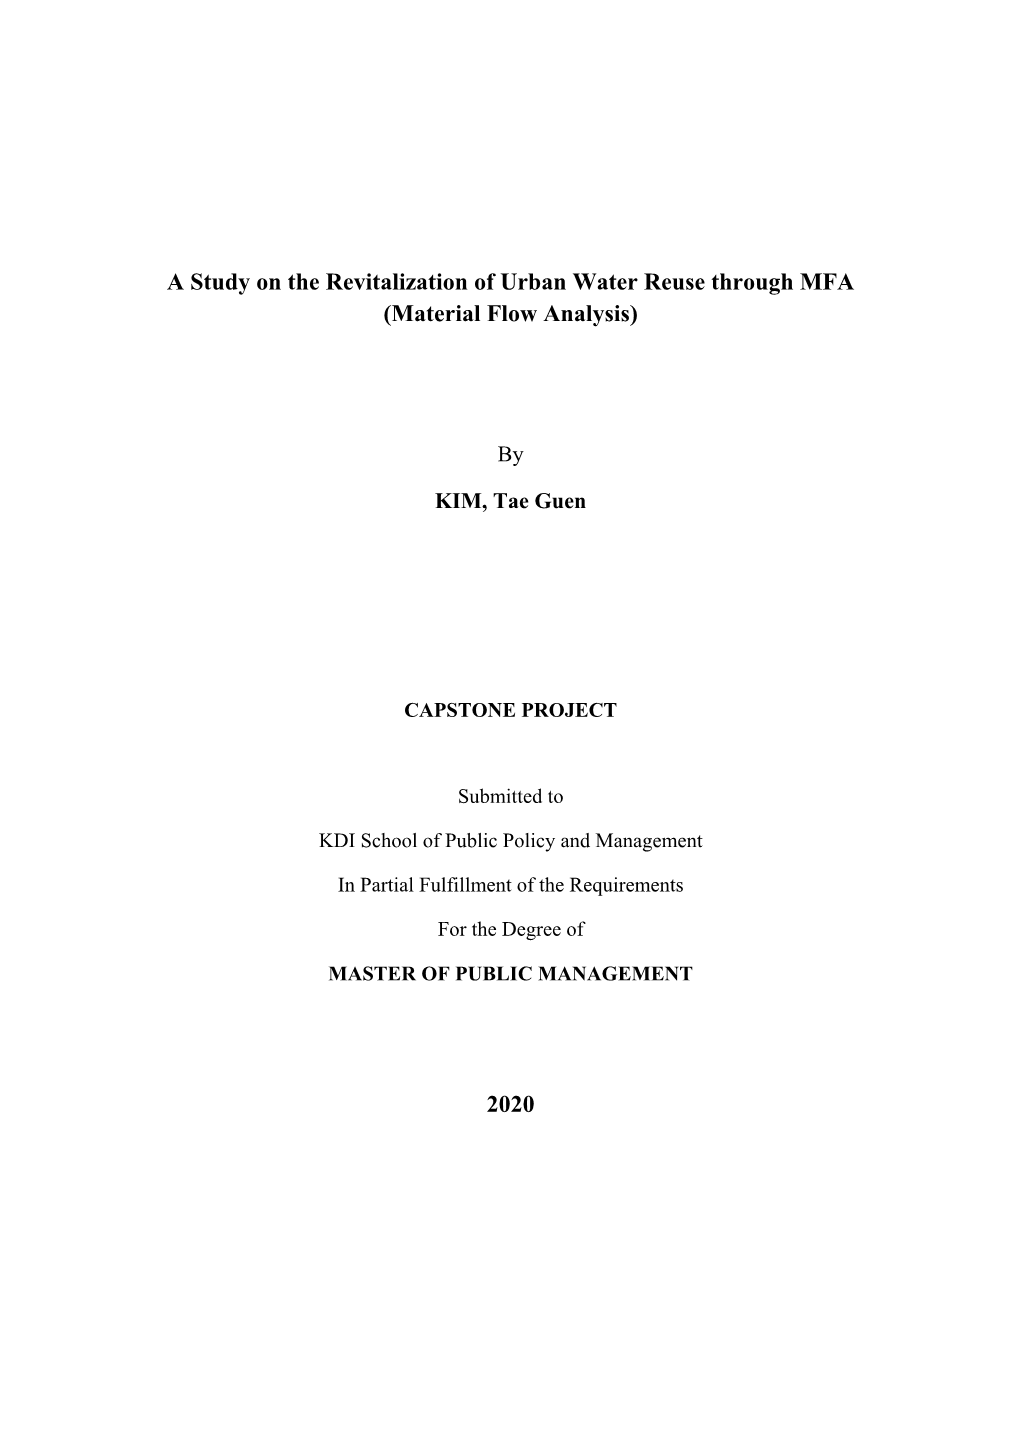 A Study on the Revitalization of Urban Water Reuse Through MFA (Material Flow Analysis)